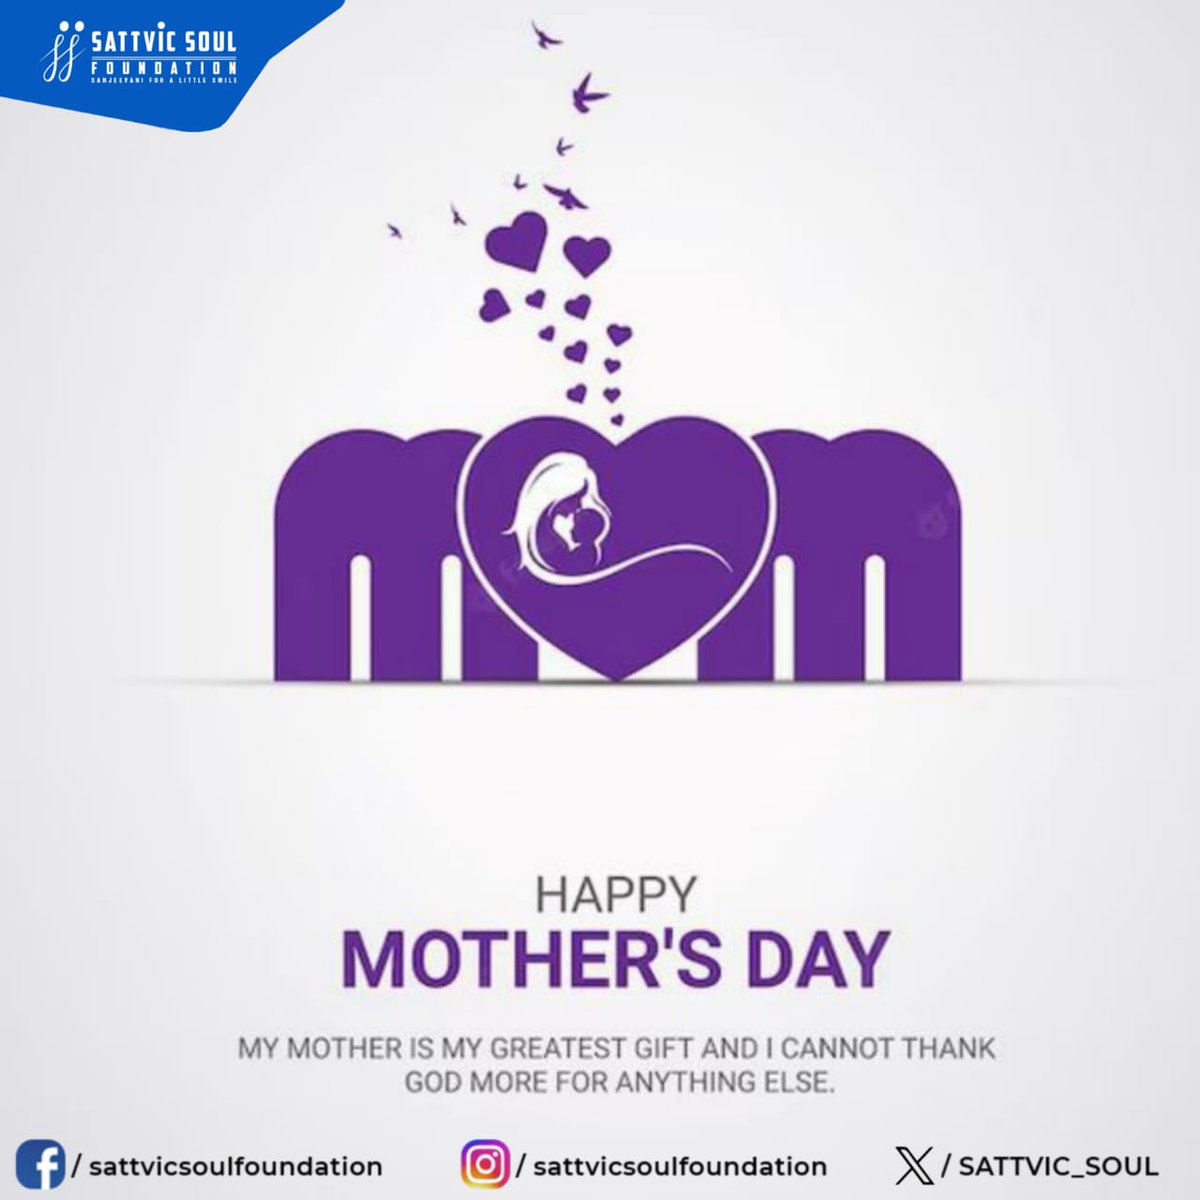 HAPPY MOTHER'S DAY🌷 This Mother's Day, take a moment to thank the women who have shaped your life with love, care, and 👩‍🍼dedication. Whether it's your mother, wife, sister, or friend, show your appreciation for all that they do. #happymothersday